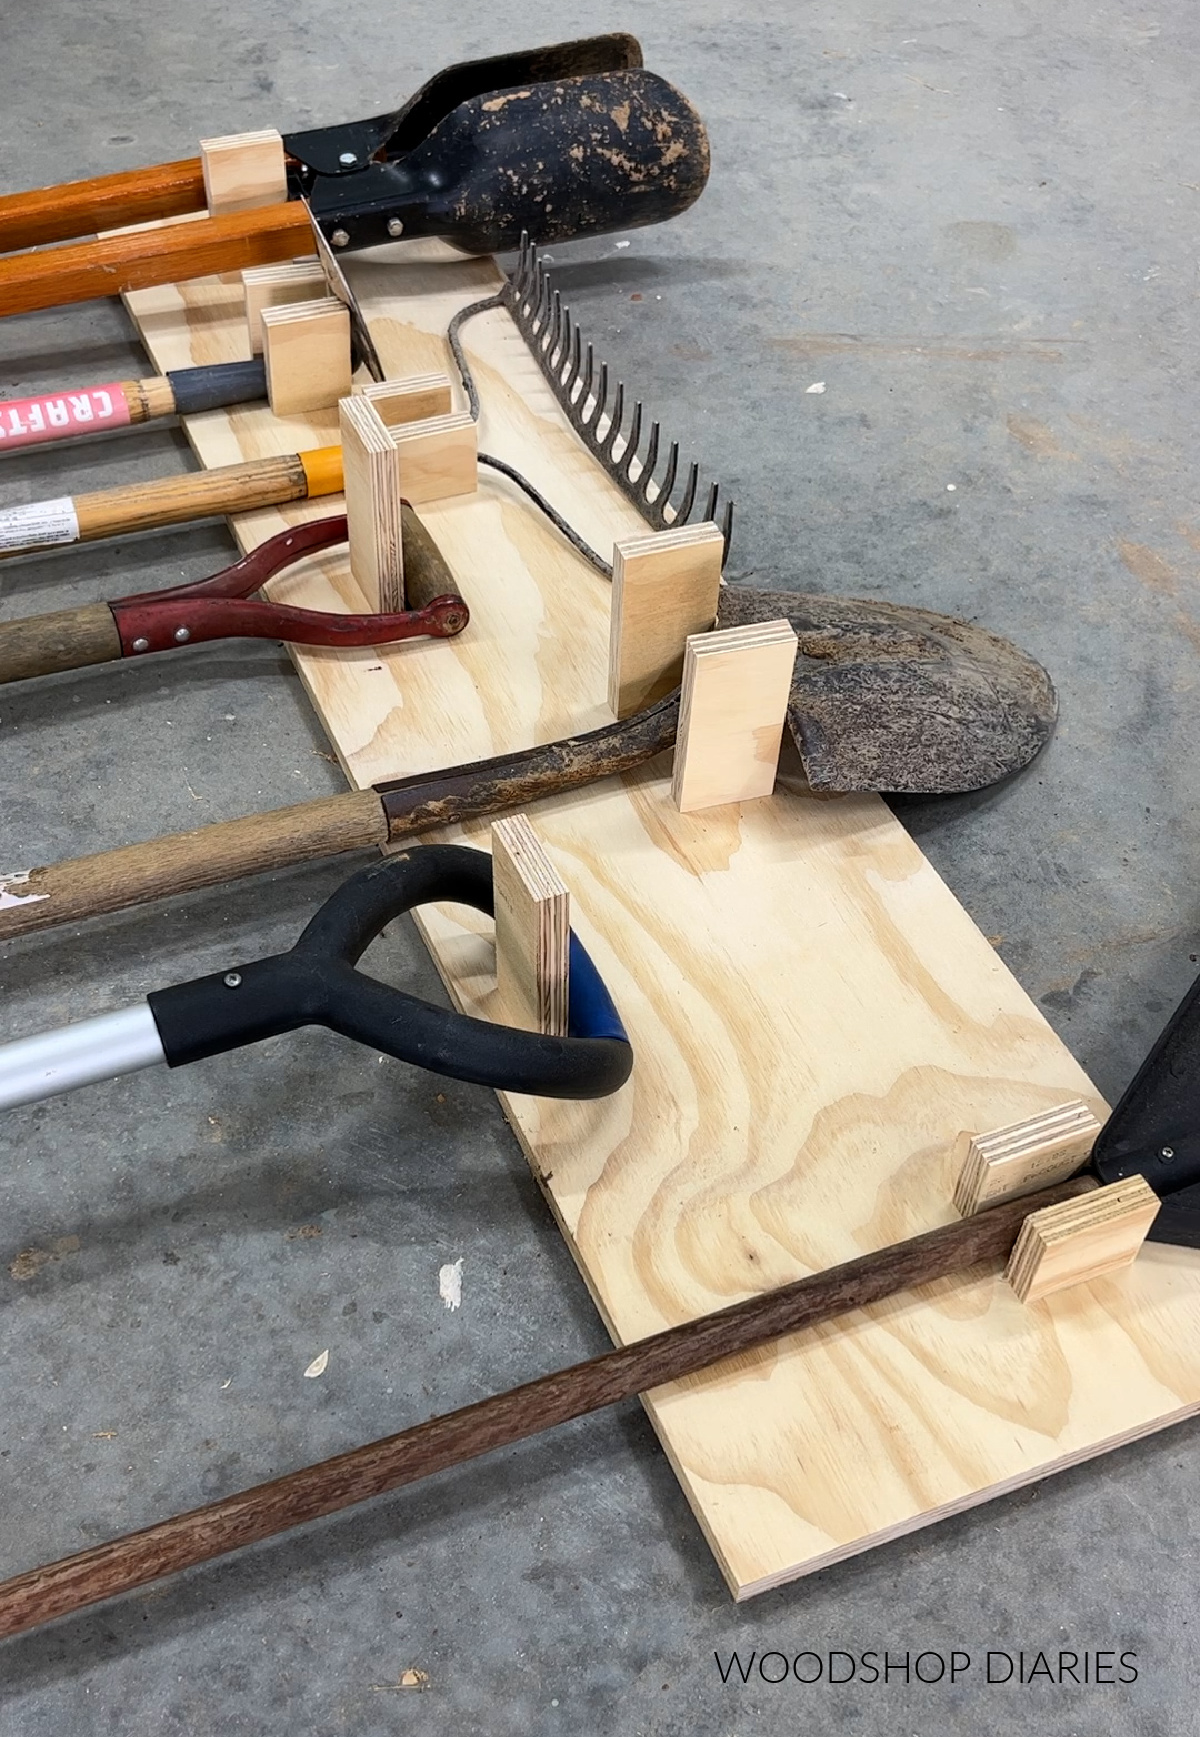 Yard tools laid out on plywood with hanger pieces cut to size under each tool